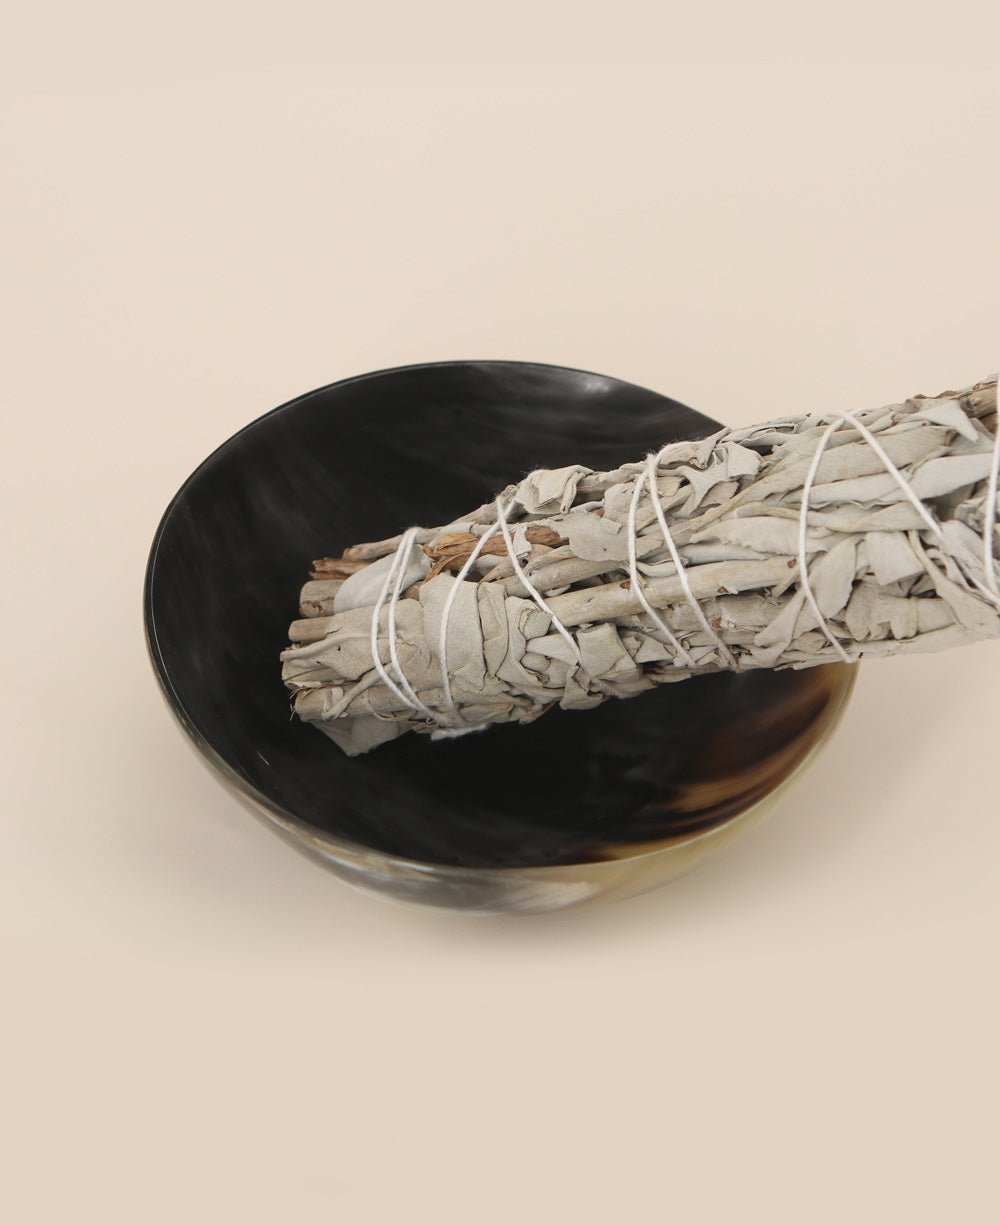 Ritual Bowl for Incense and Smudging With White Sage Bundle - Decorative Bowls